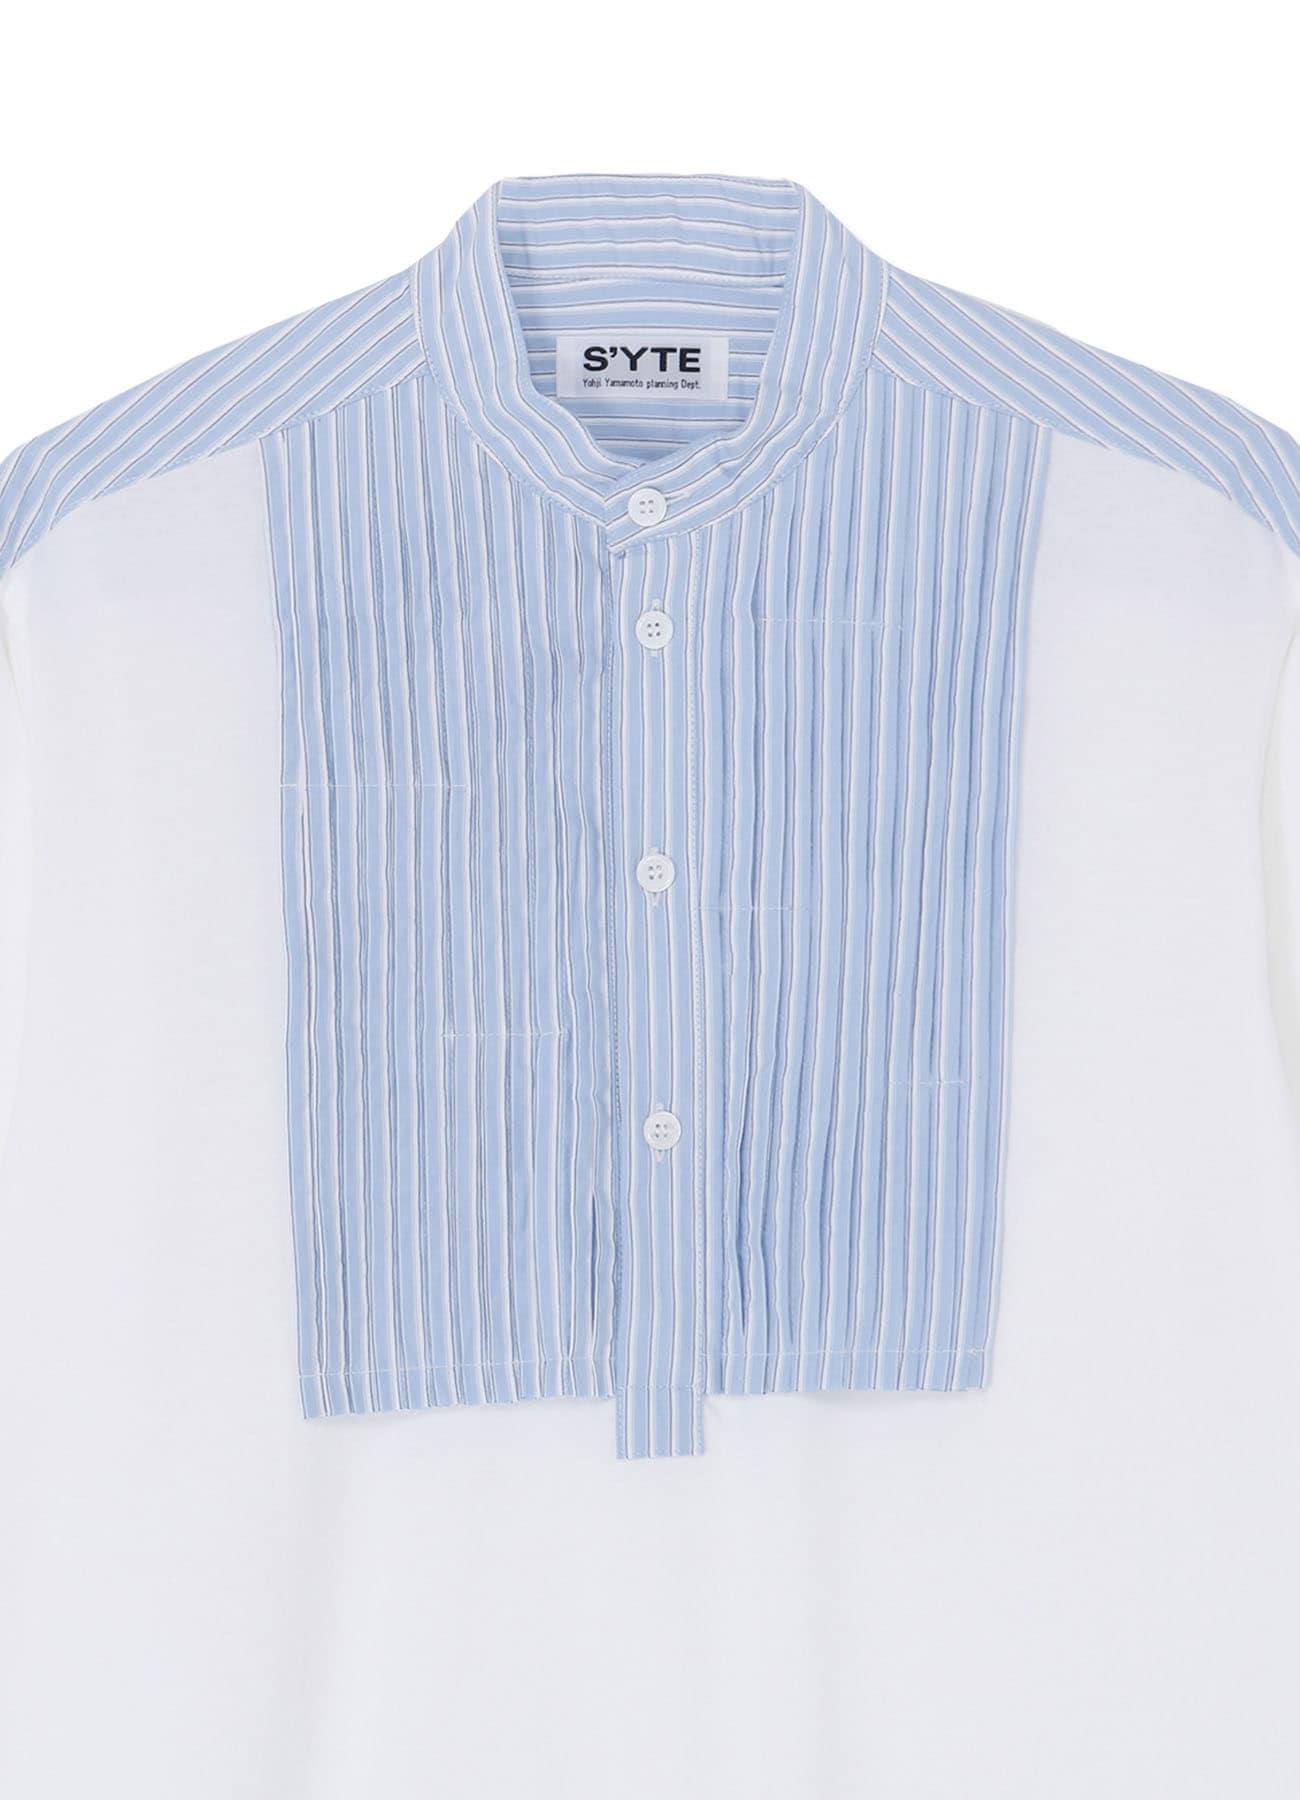 40/2 COTTON JERSEY + STRIPED FABRIC CHEST PIN TUCKED SHIRT